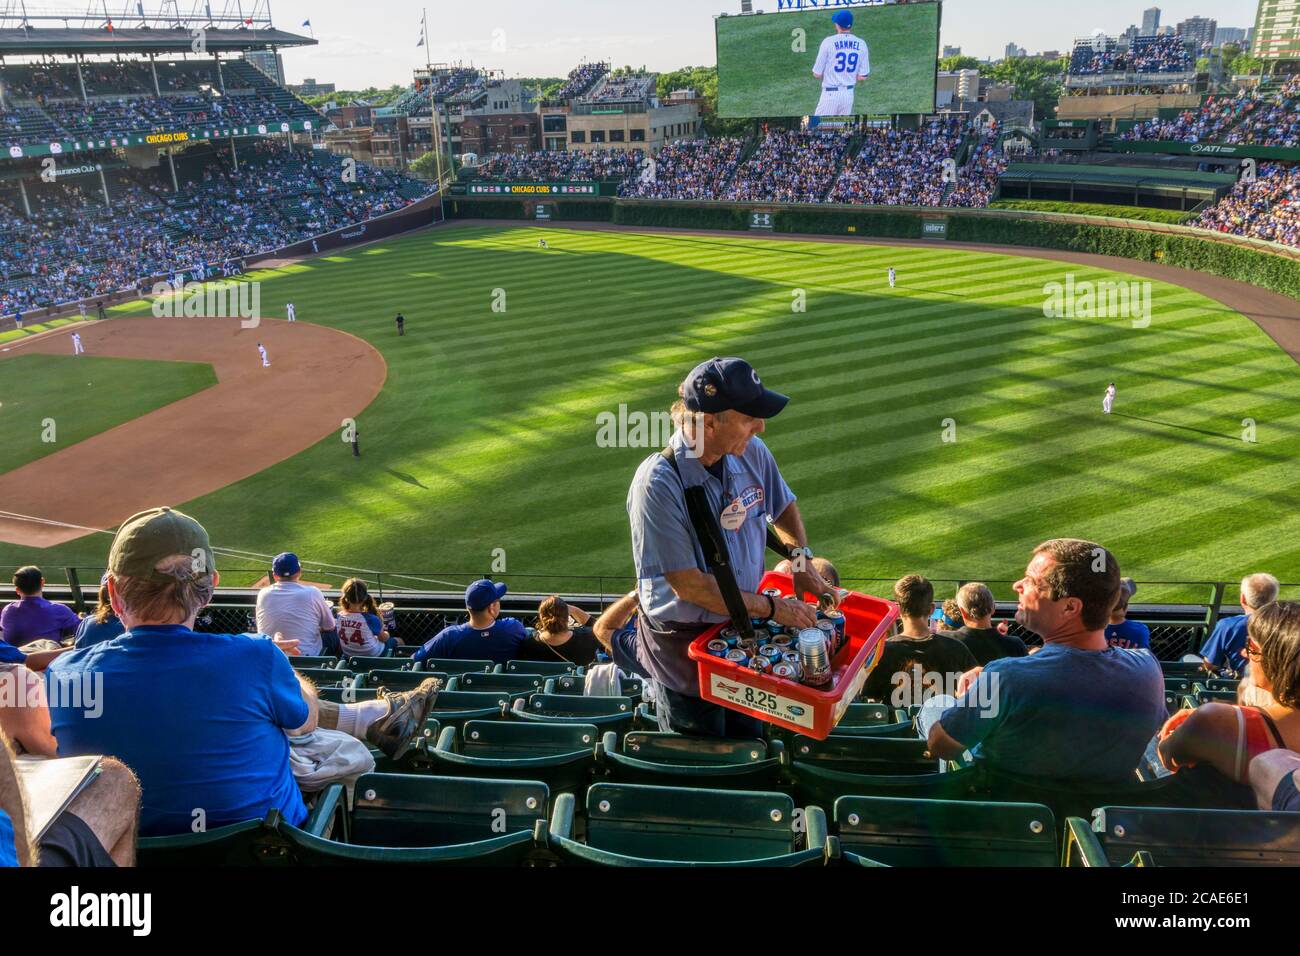 Steward selling cold beers at an American baseball game at Wrigley Field, Chicago.  Chicago Cubs v LA Dodgers. Stock Photo